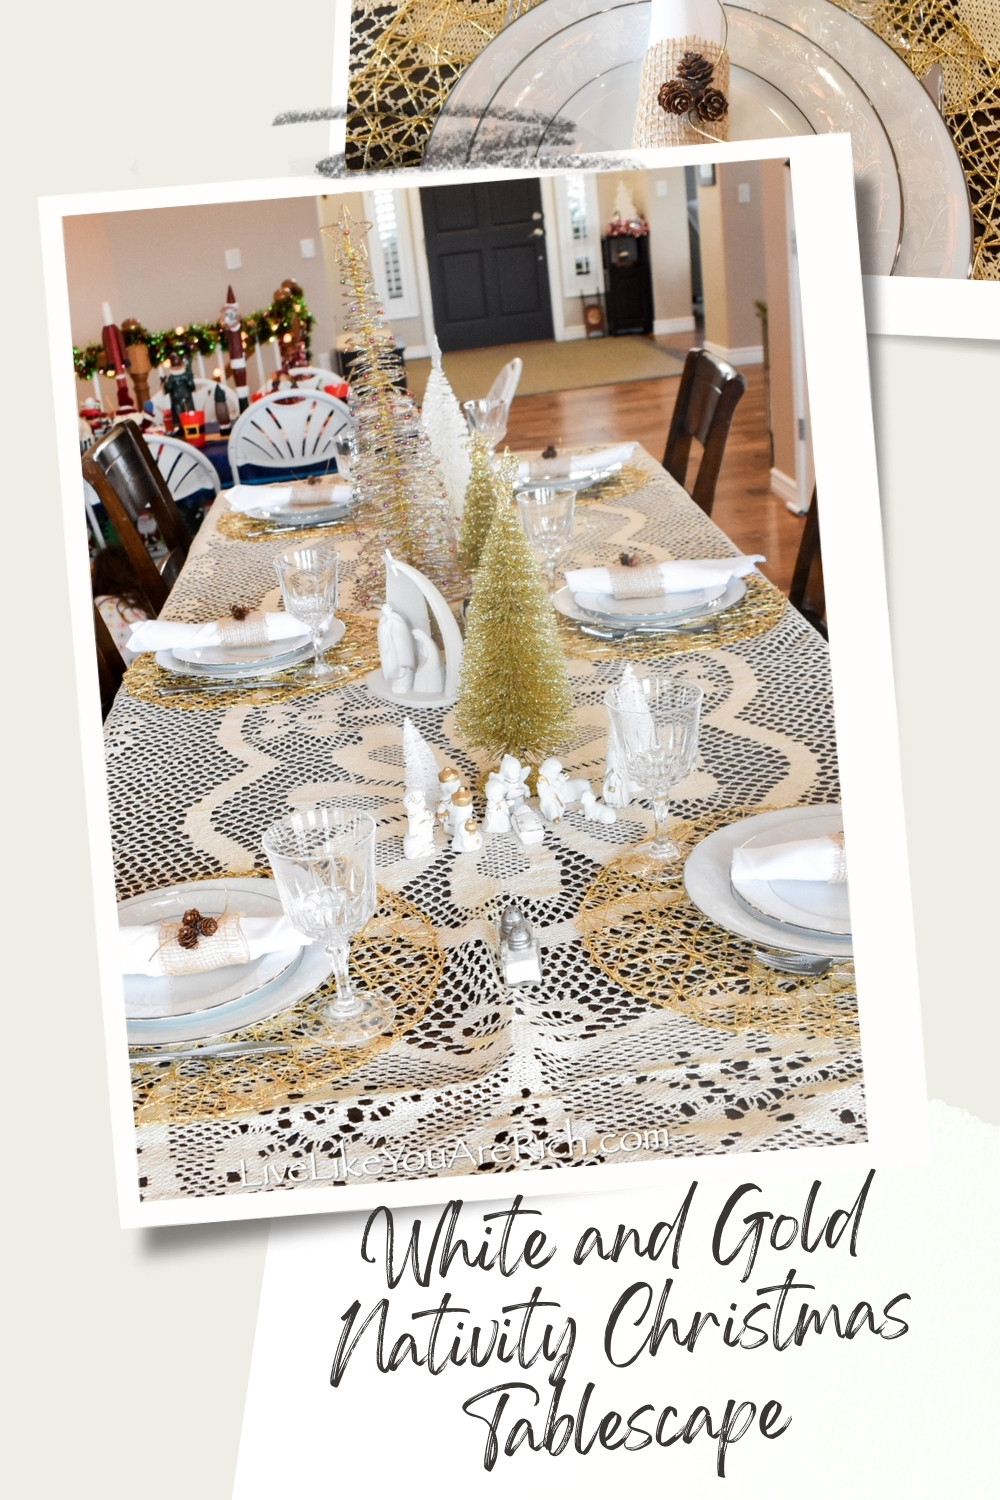 White and Gold Nativity Christmas Tablescape